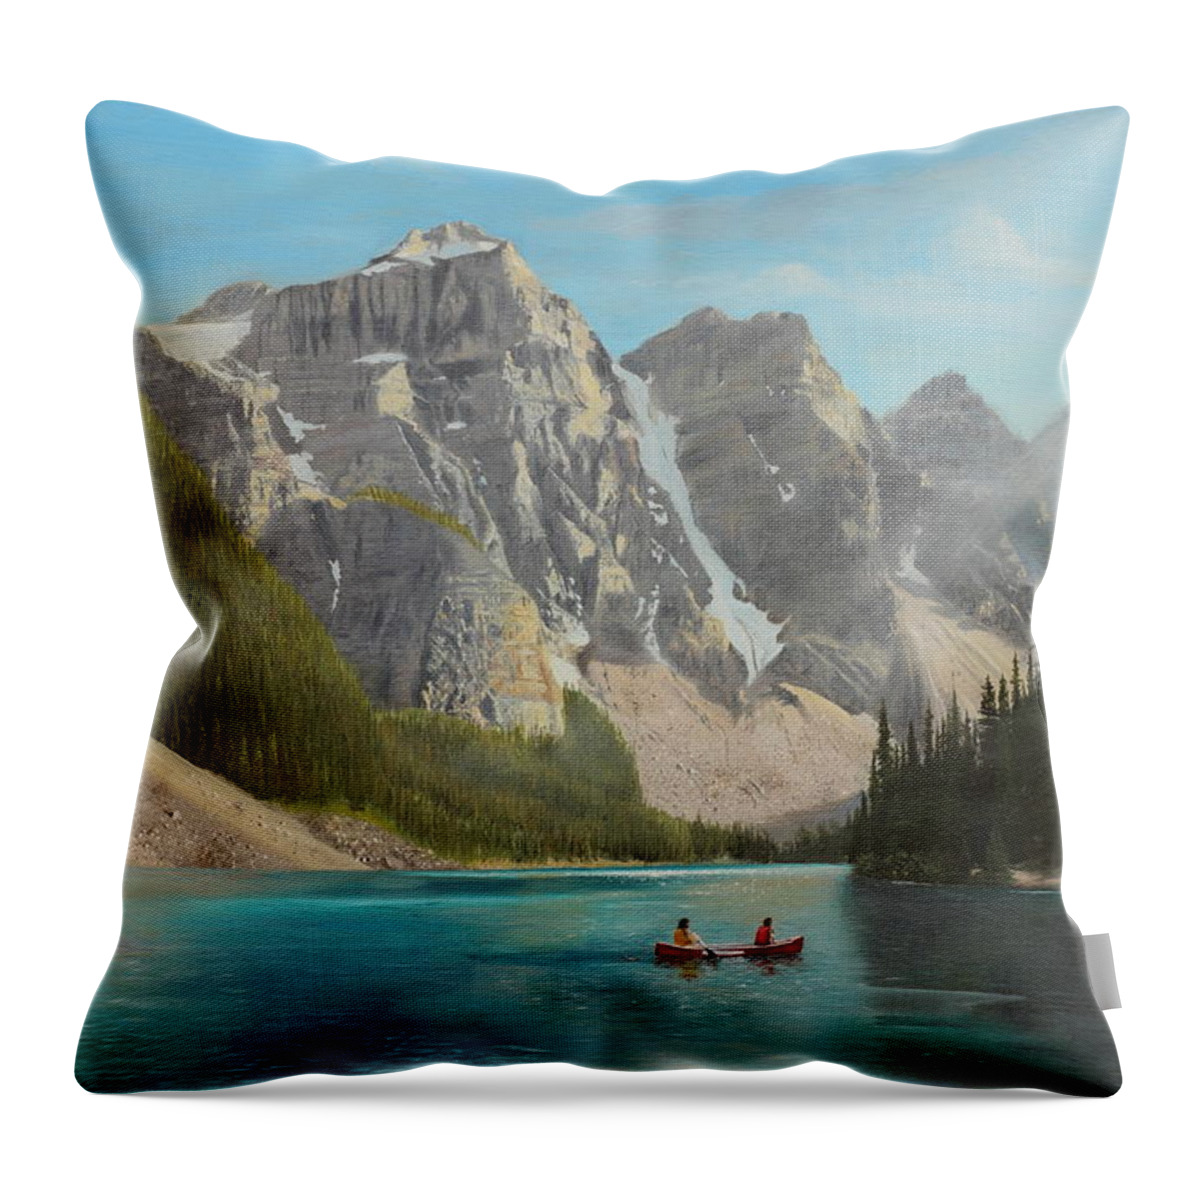 Landscape Throw Pillow featuring the painting Quiet Day by Glenn Beasley